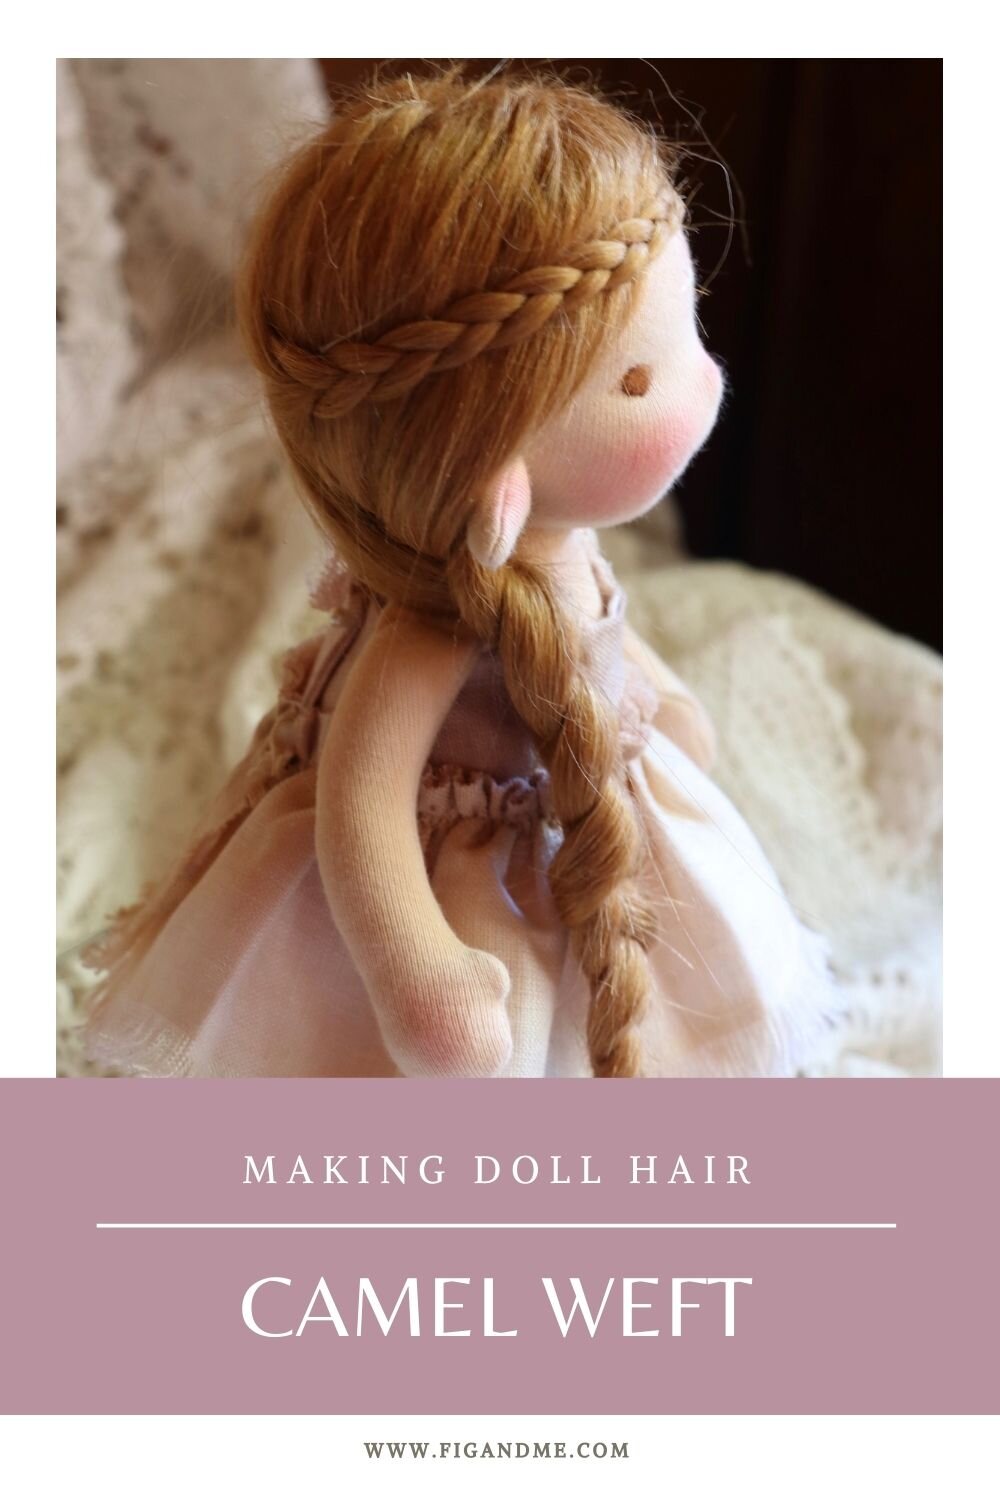 Dollmaking tips, how to make doll hair — fig & me